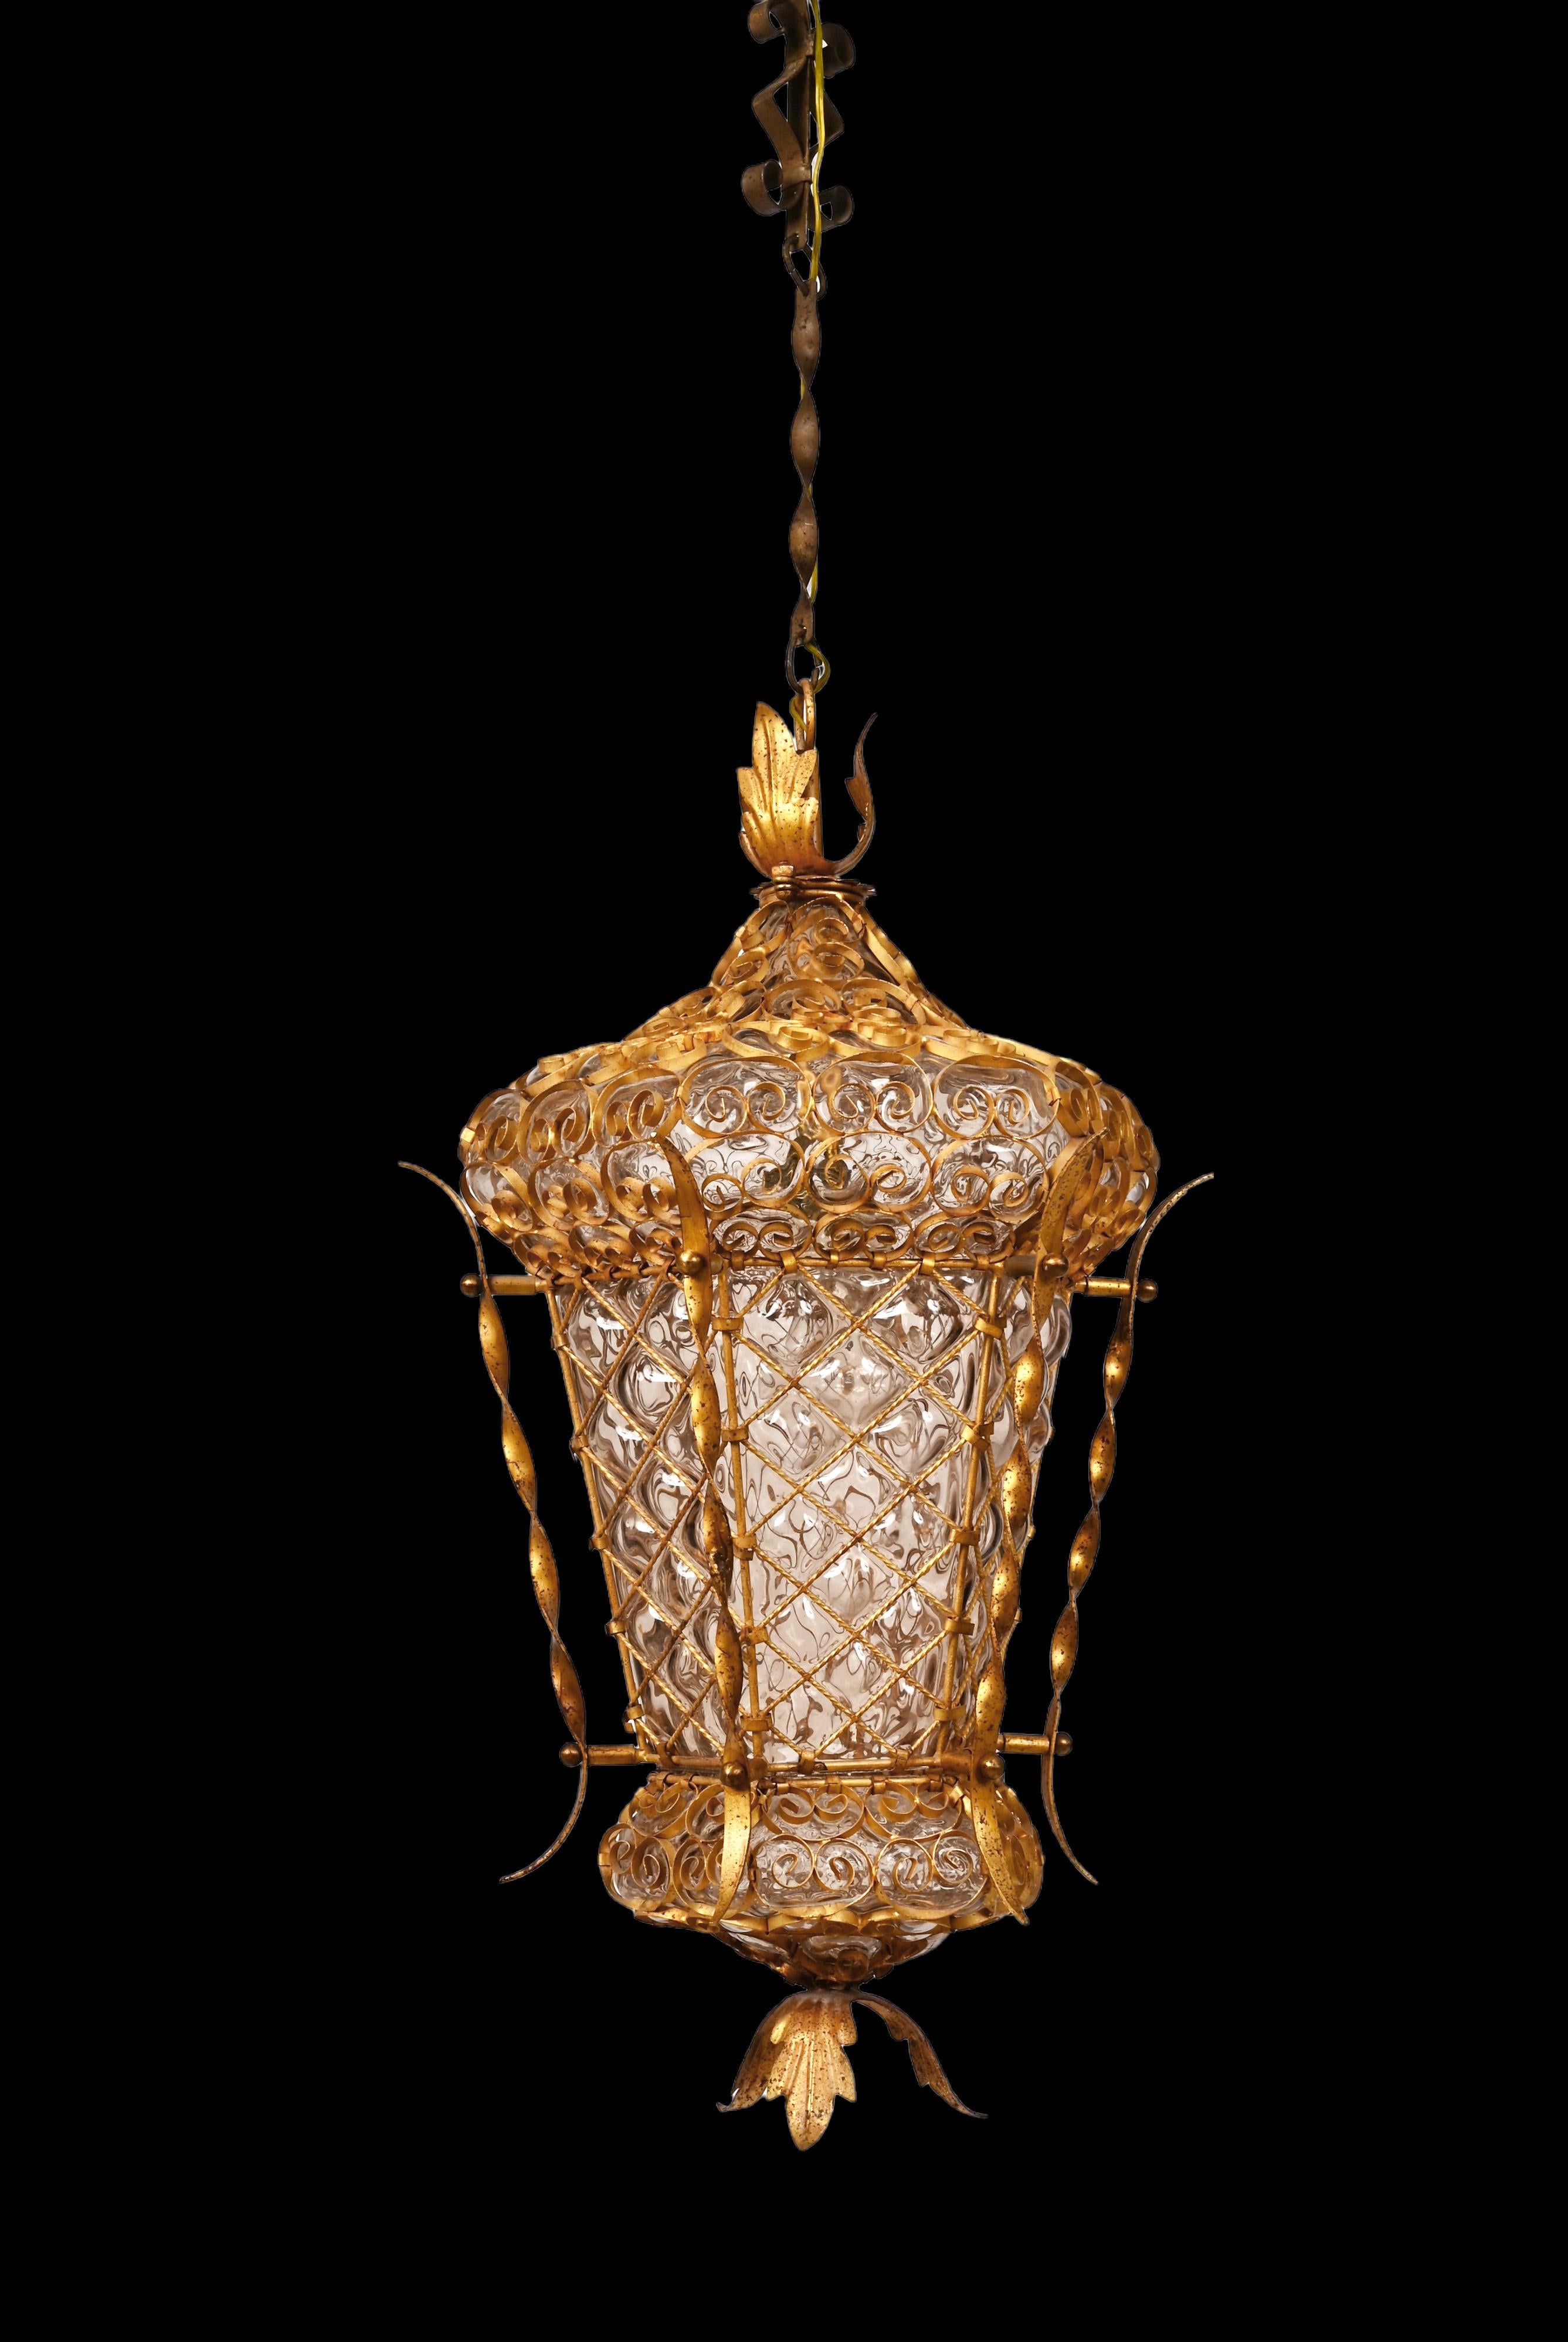 Midcentury Venetian Mouth Blown Glass in Gold Painted Metal Frame Lantern, 1940s For Sale 3